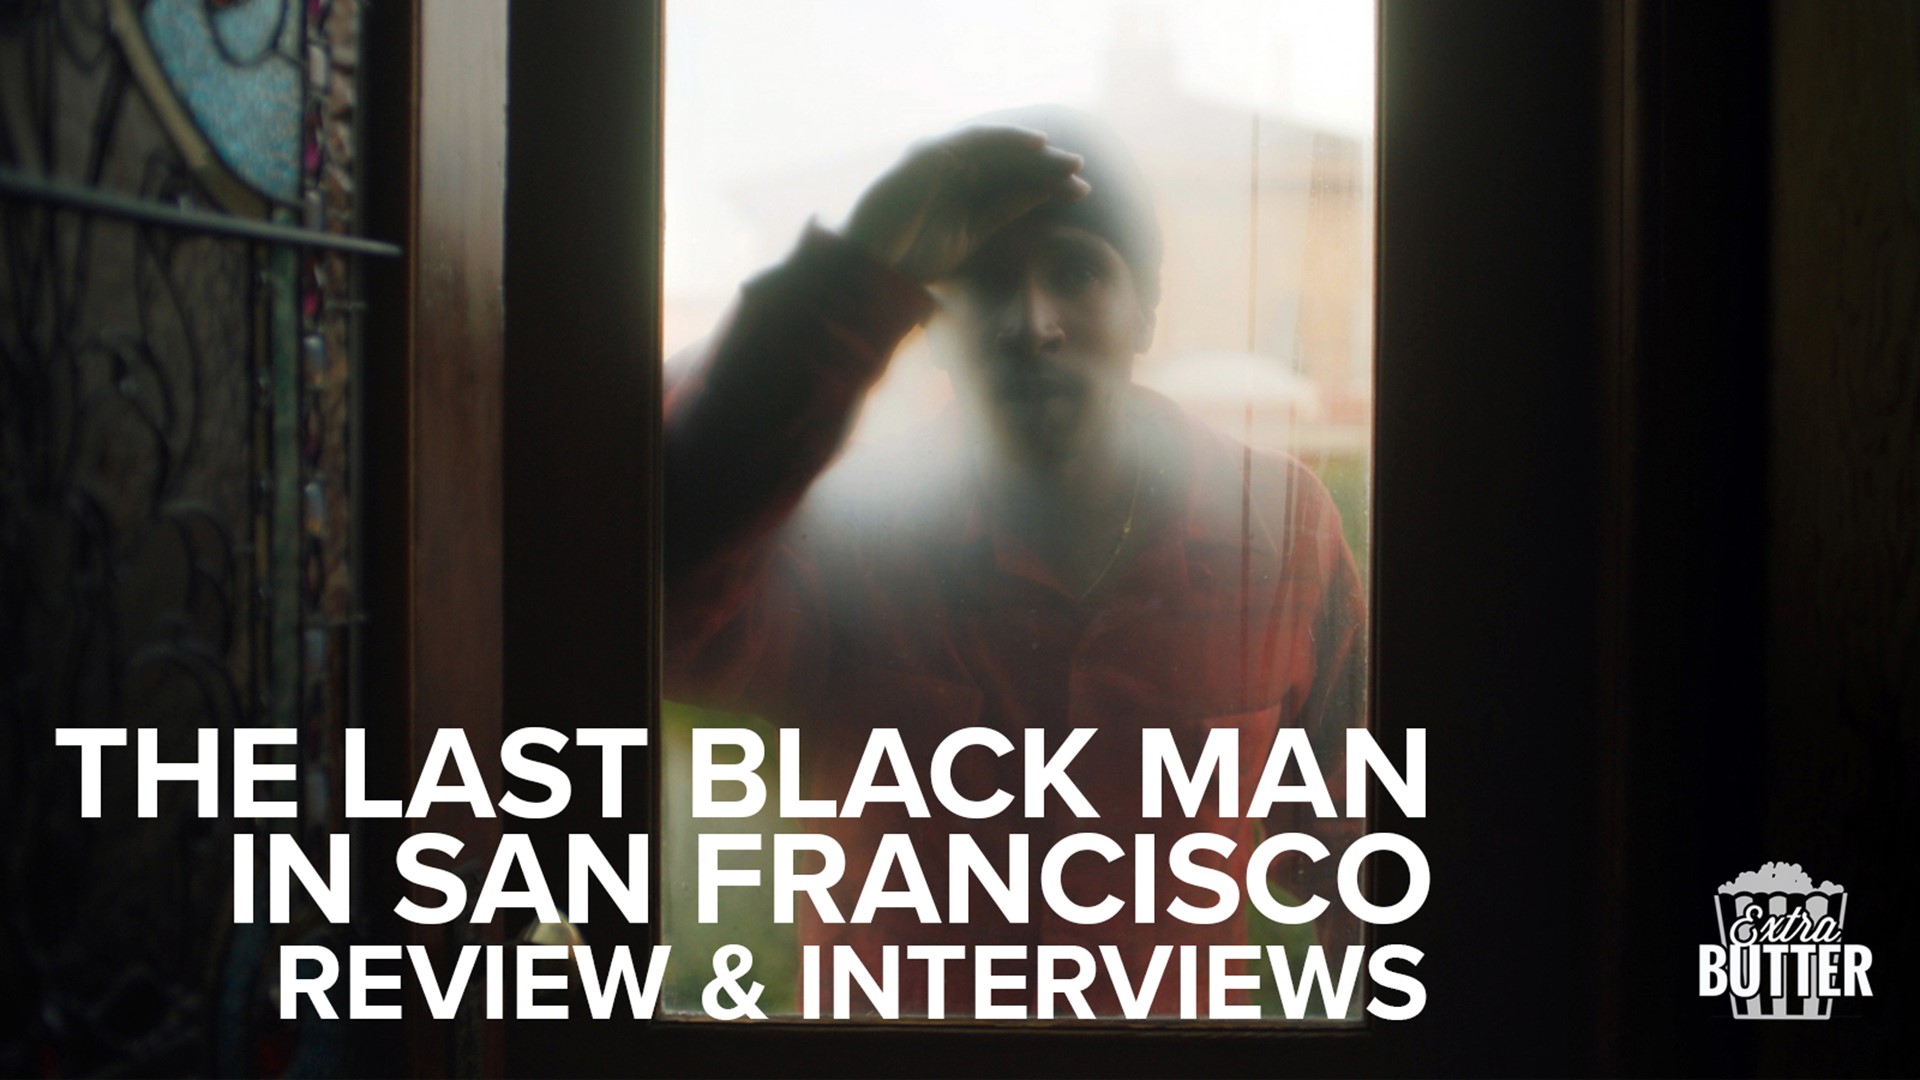 'The Last Black Man in San Francisco' tells the story of gentrification in the city. Hear why Danny Glover, who calls San Francisco home, felt he had to be part of this movie.